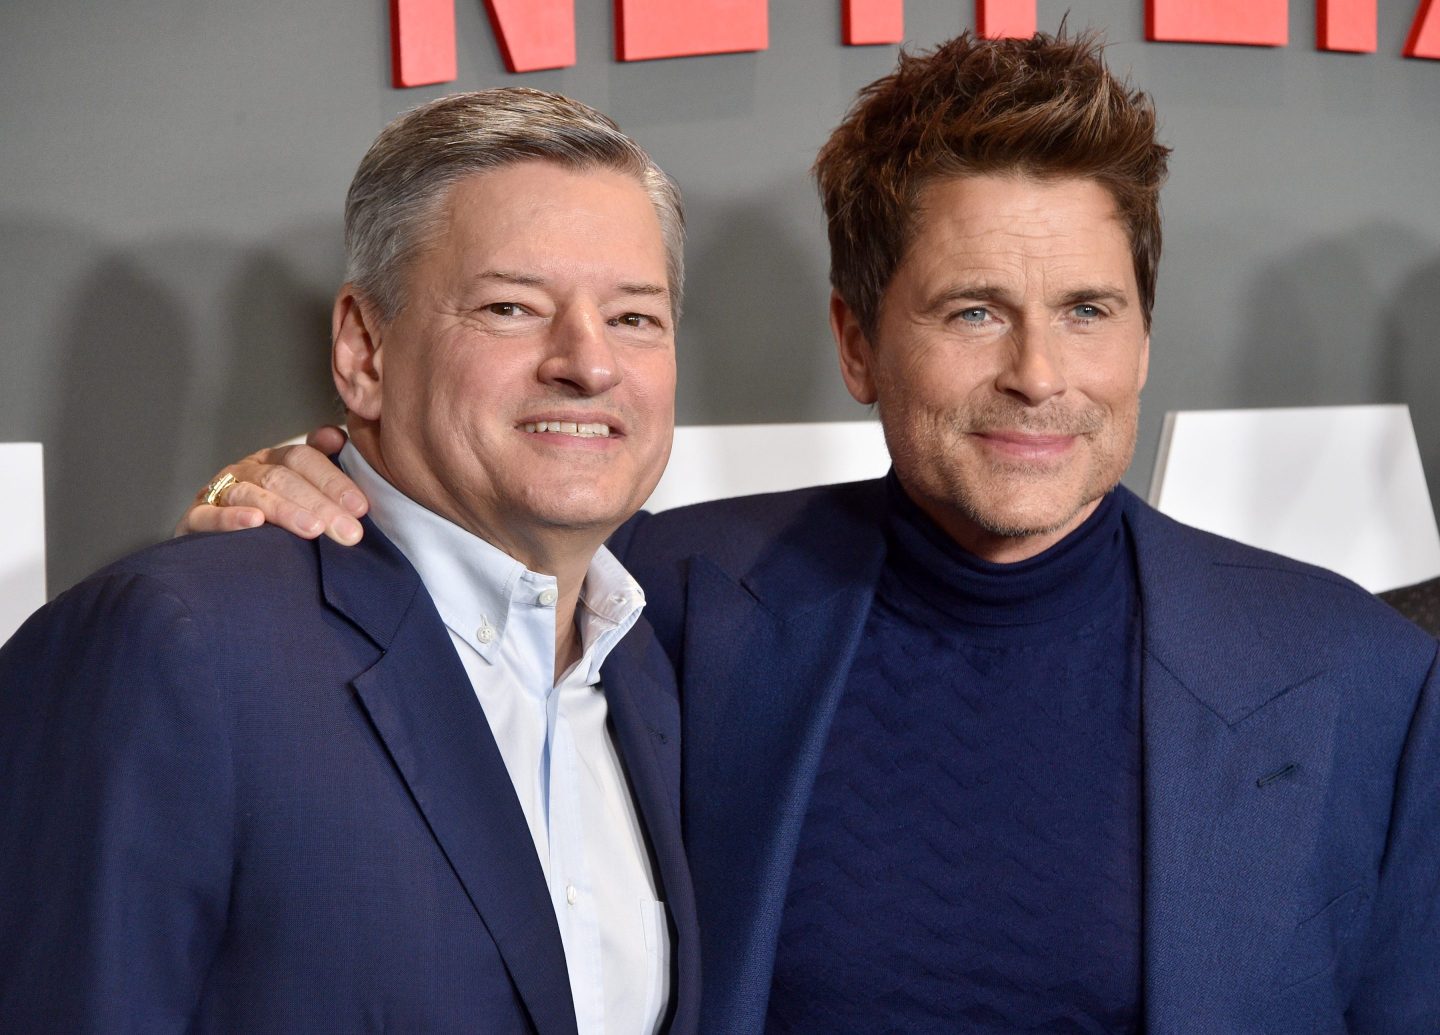 Ted Sarandos and Rob Lowe attend the Los Angeles premiere of Netflix's "Unstable" at TUDUM Theater on March 23, 2023 in Hollywood, California.